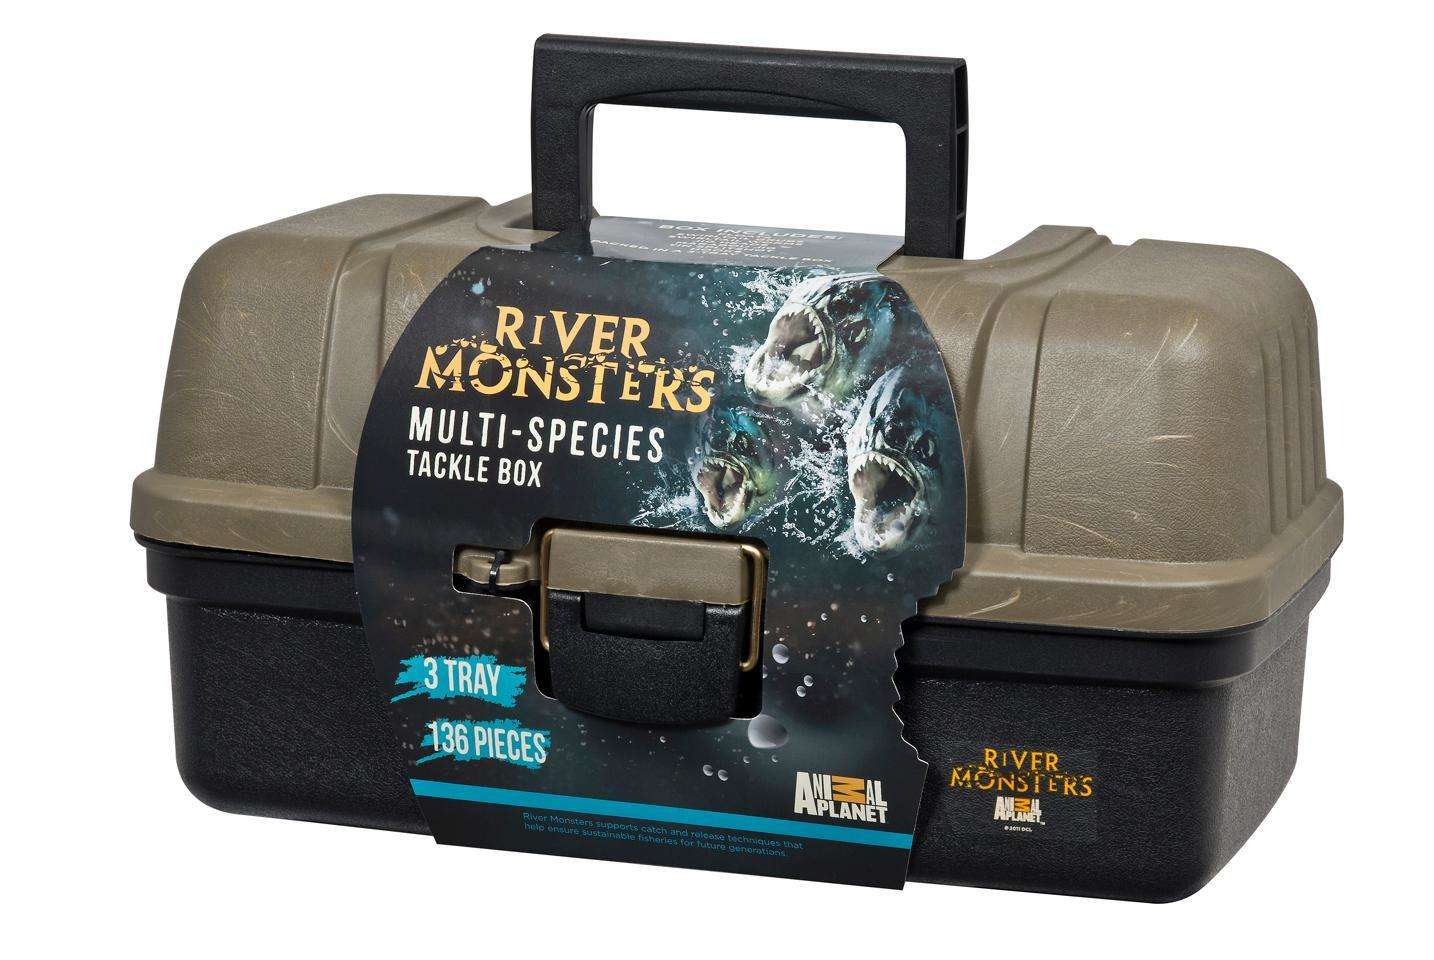 River Monsters 3 Tray Tackle Box 135 Piece - Starter Assortment Of Fishing  Lures at OutdoorShopping